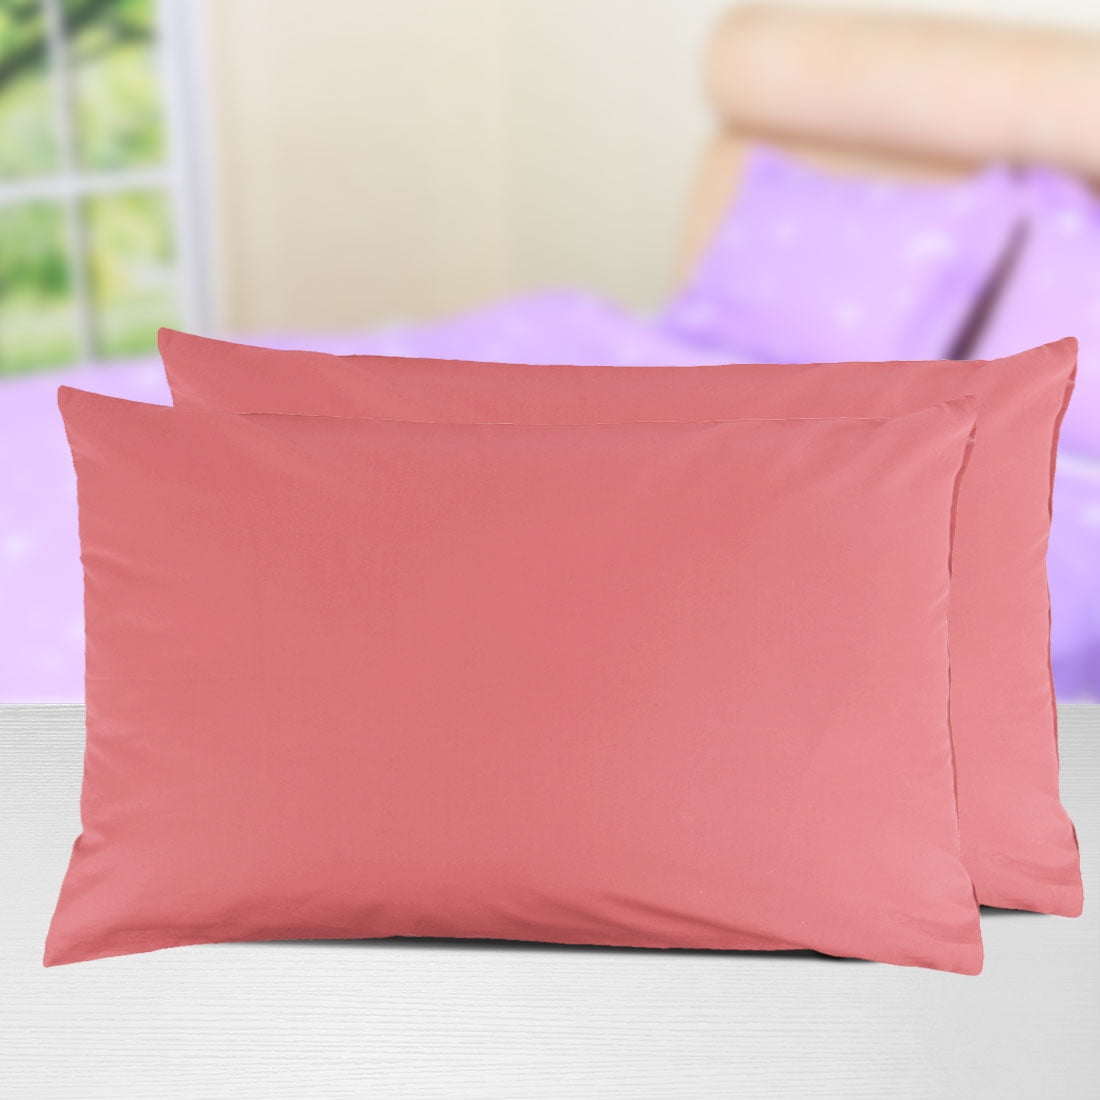 Pillow Case Cover Protector Cotton Zippered Standard Size 2 COUNT 